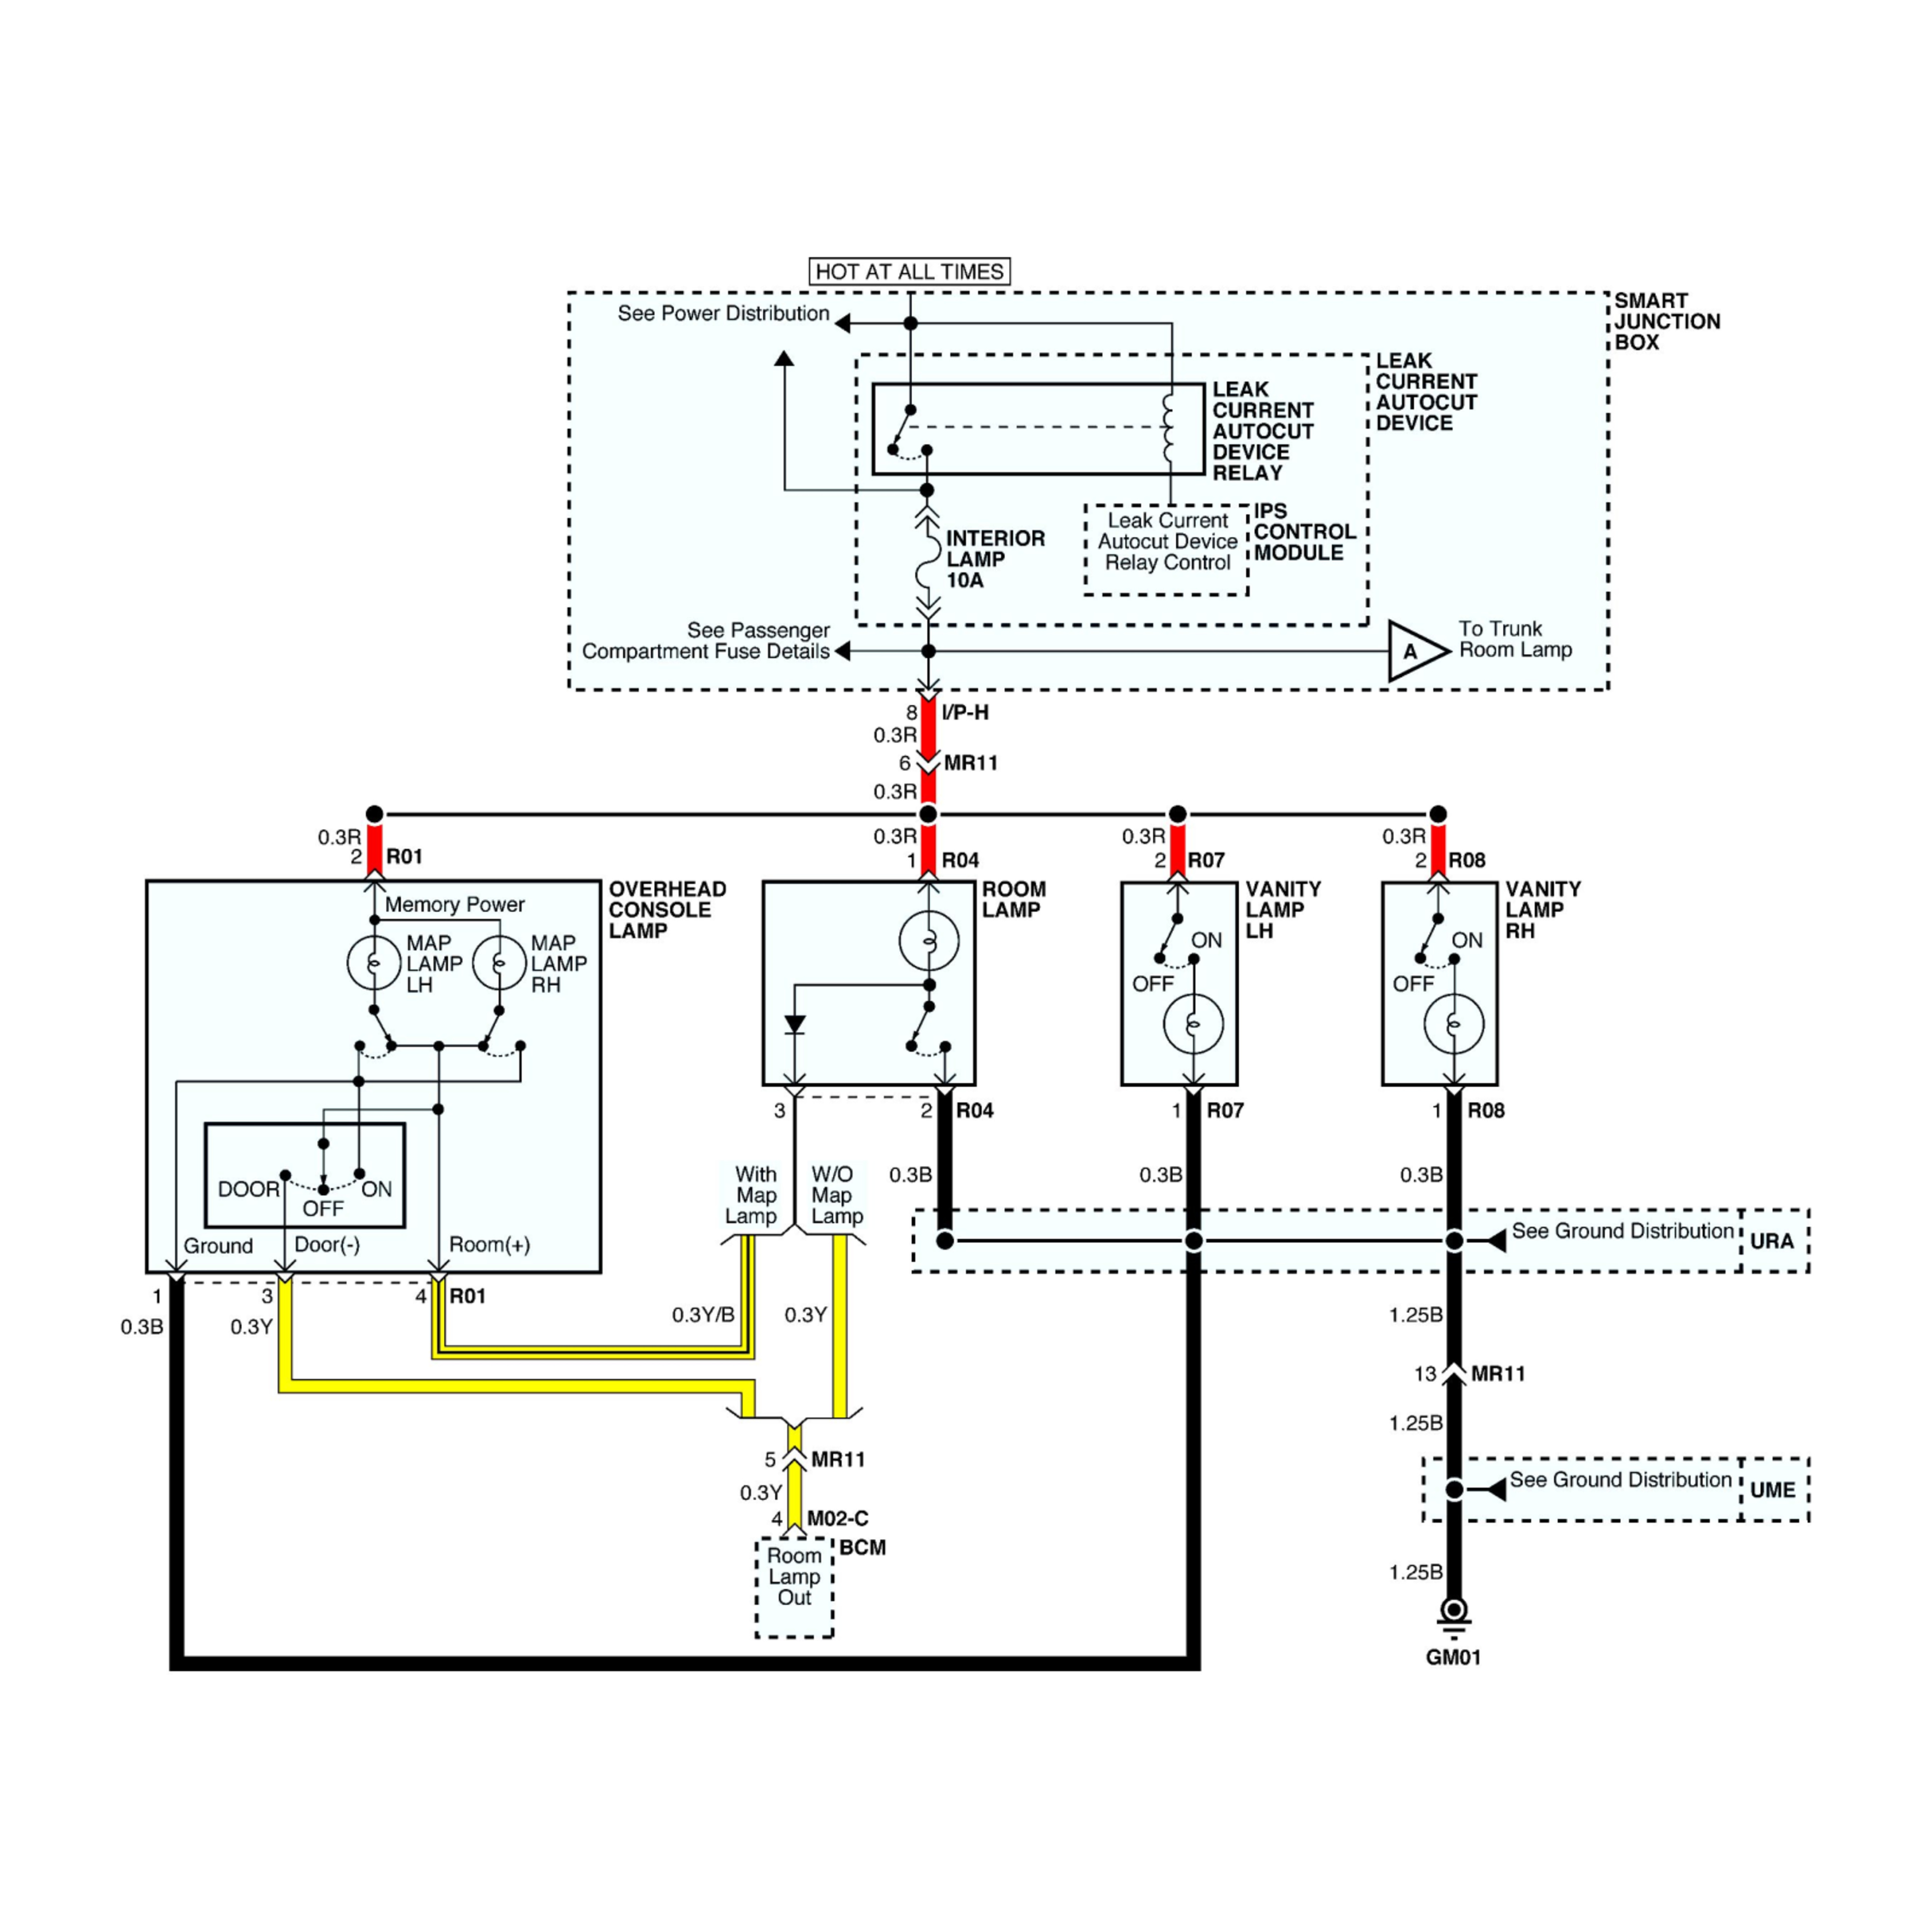 2012 Mercedes-Benz CL65 AMG wiring diagrams example